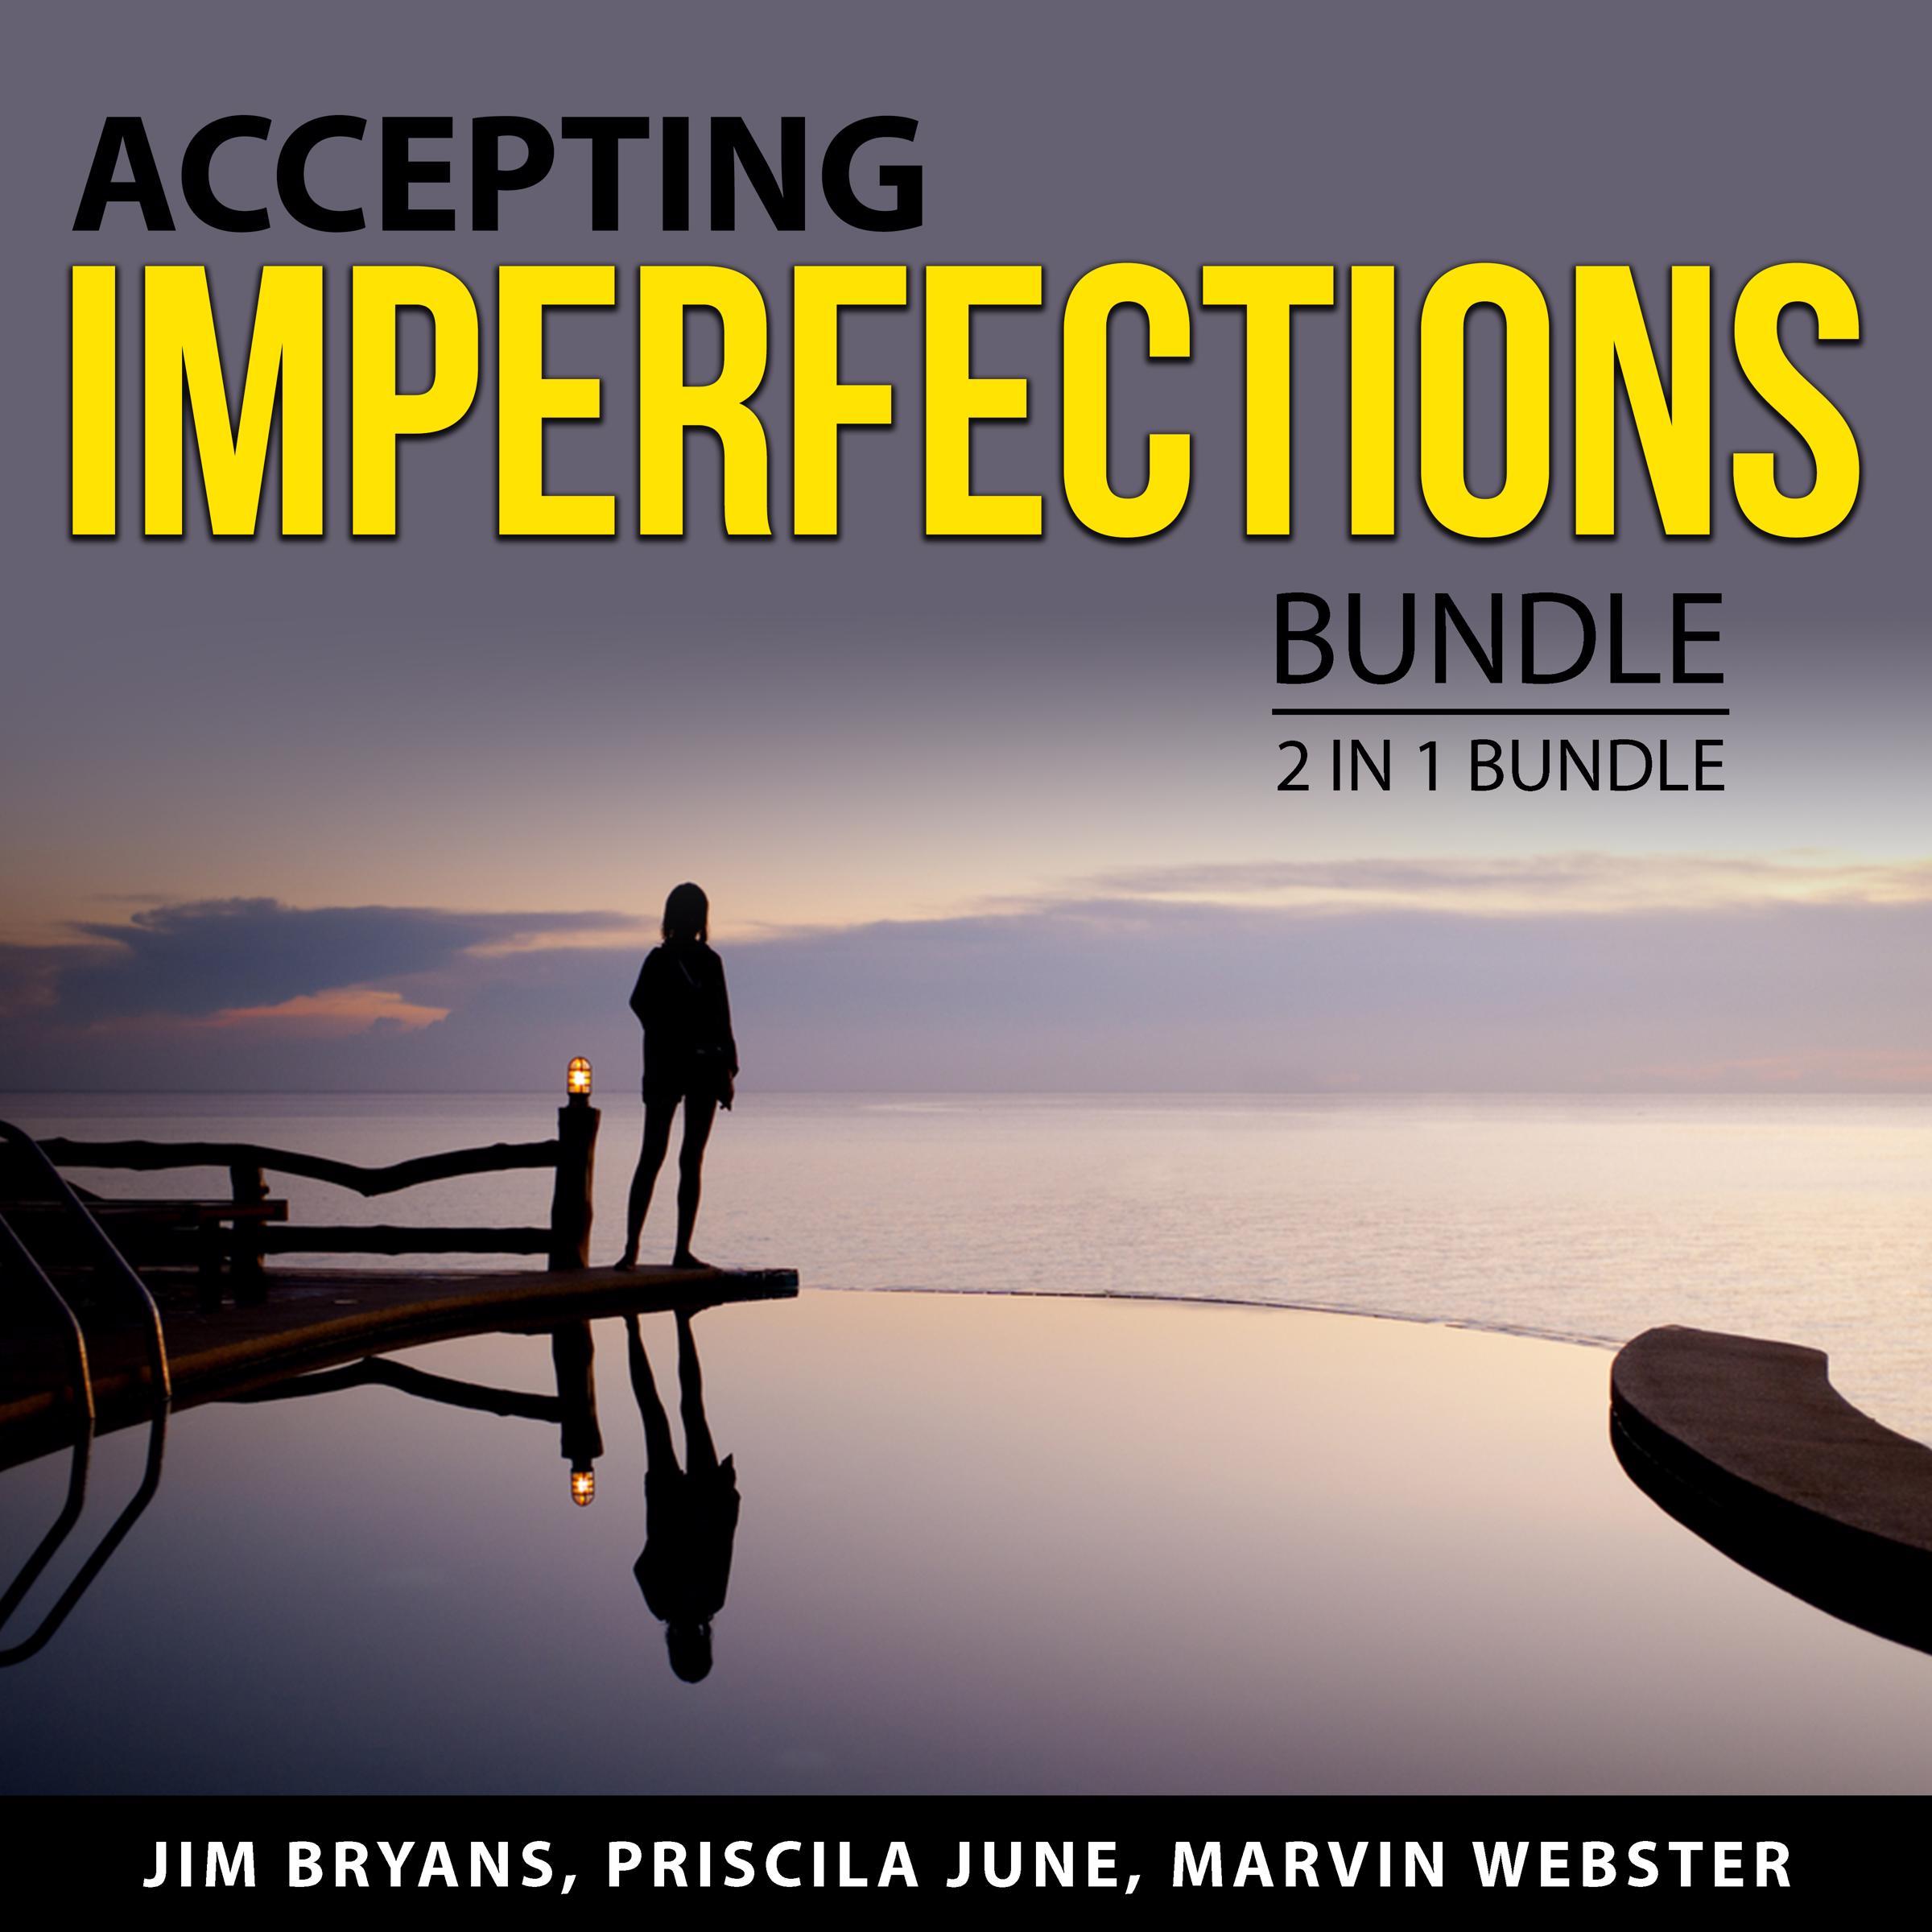 Accepting Imperfections Bundle, 3 in 1 Bundle: Perfectionism, Gifts of Imperfection,  and Love for Imperfect Things